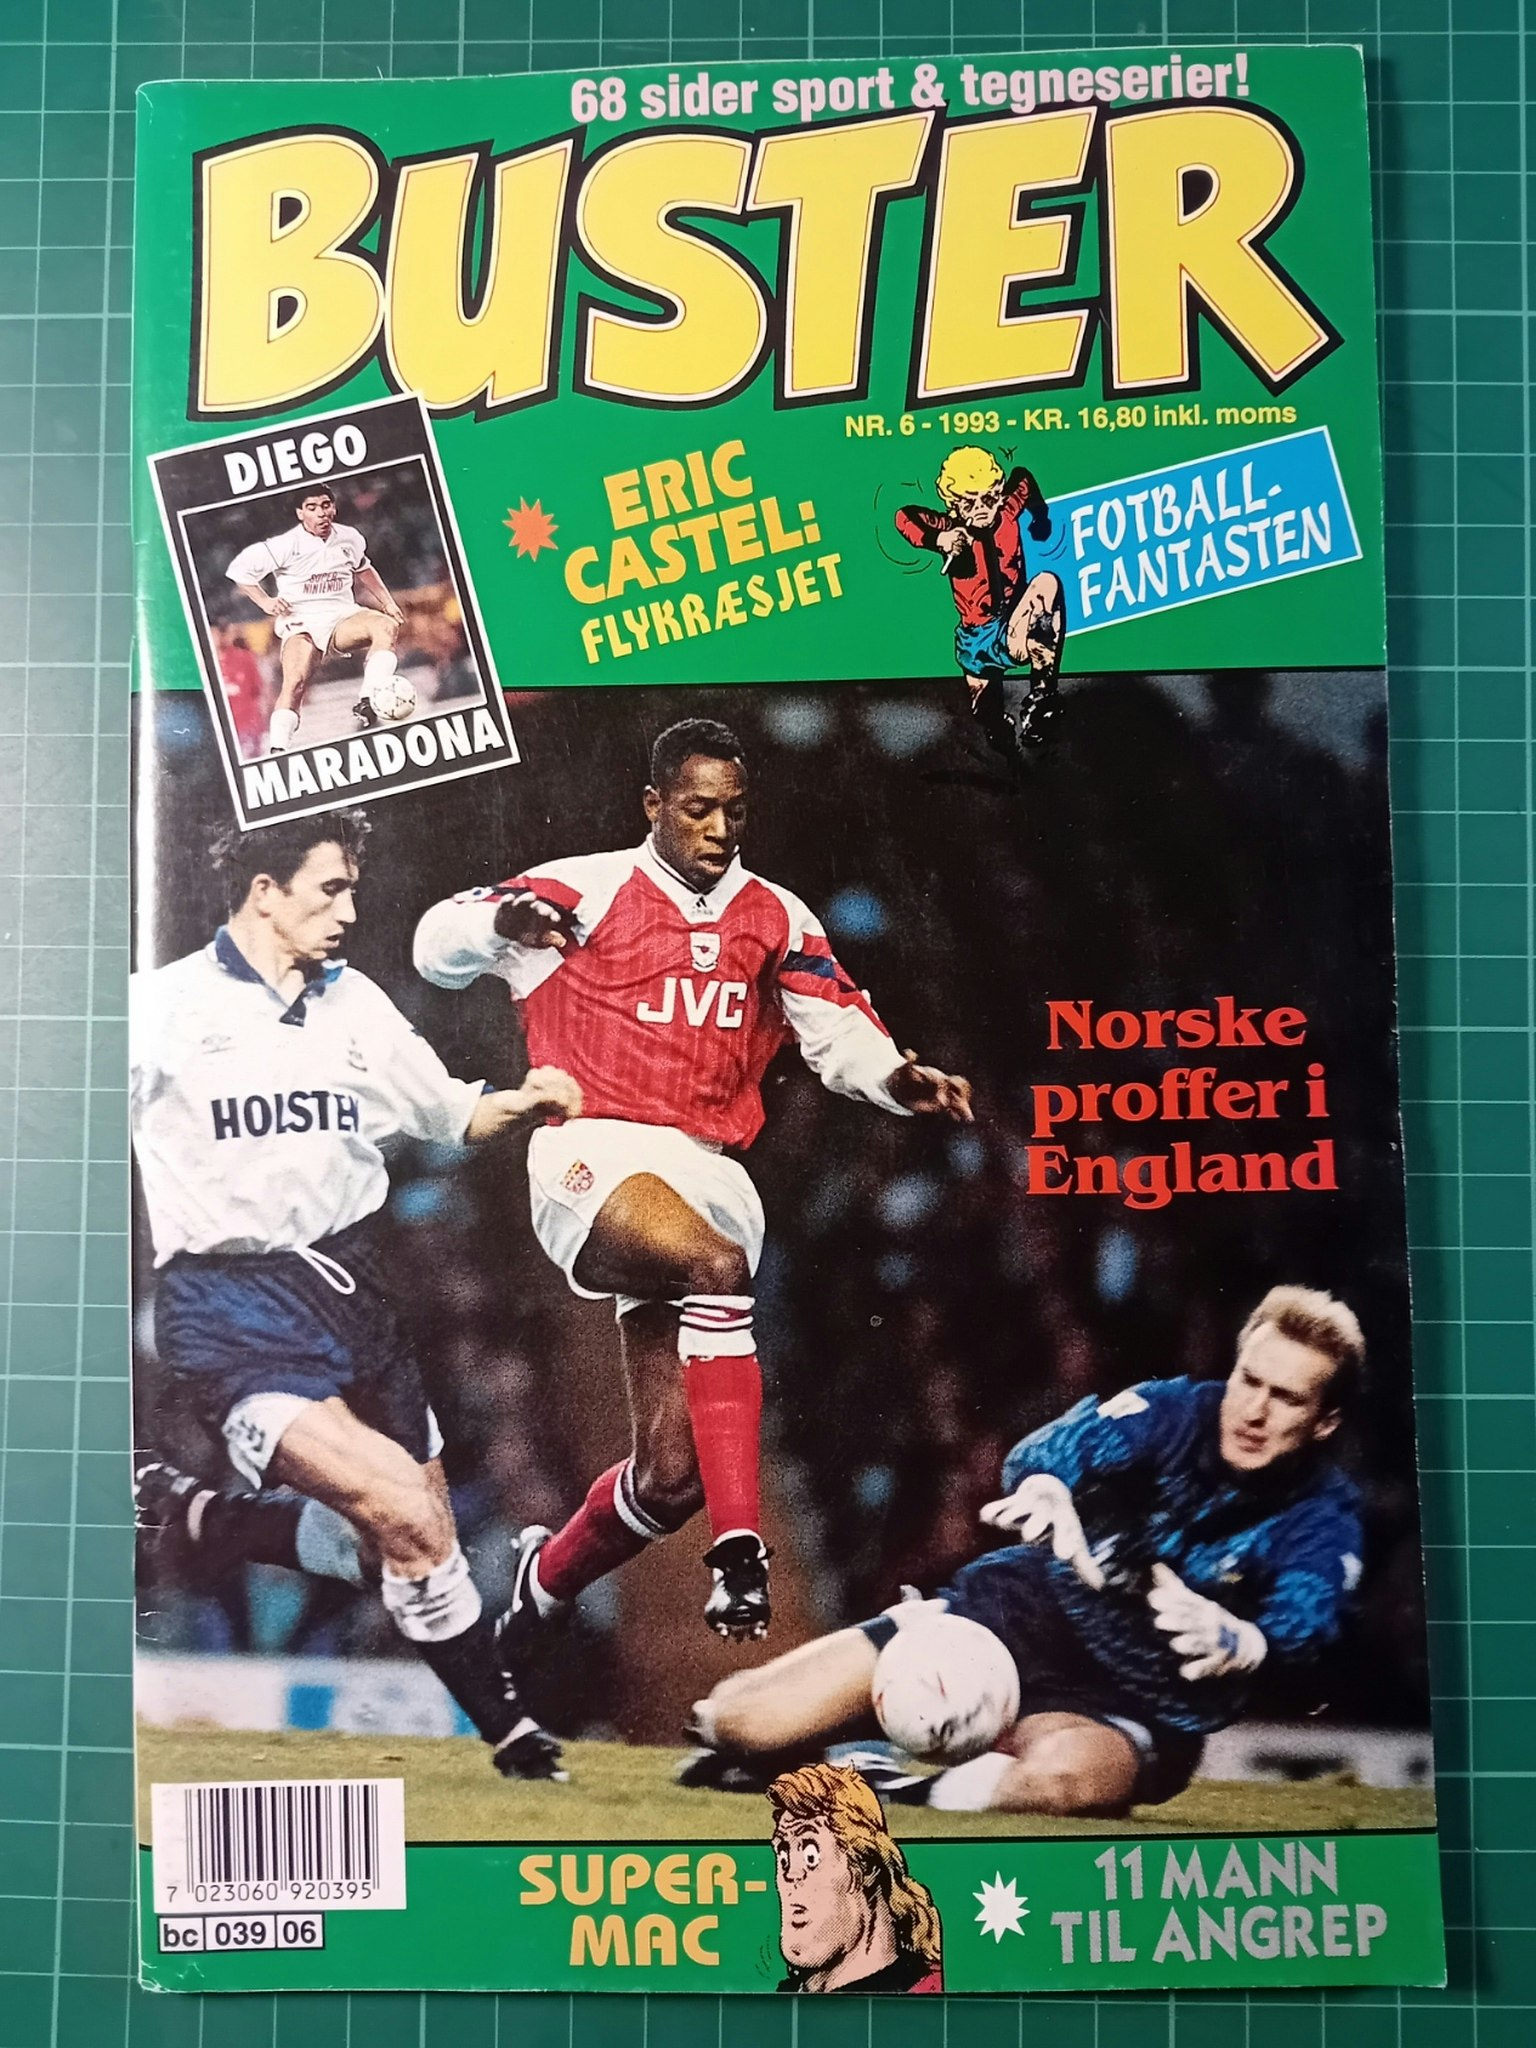 Buster 1993 - 06